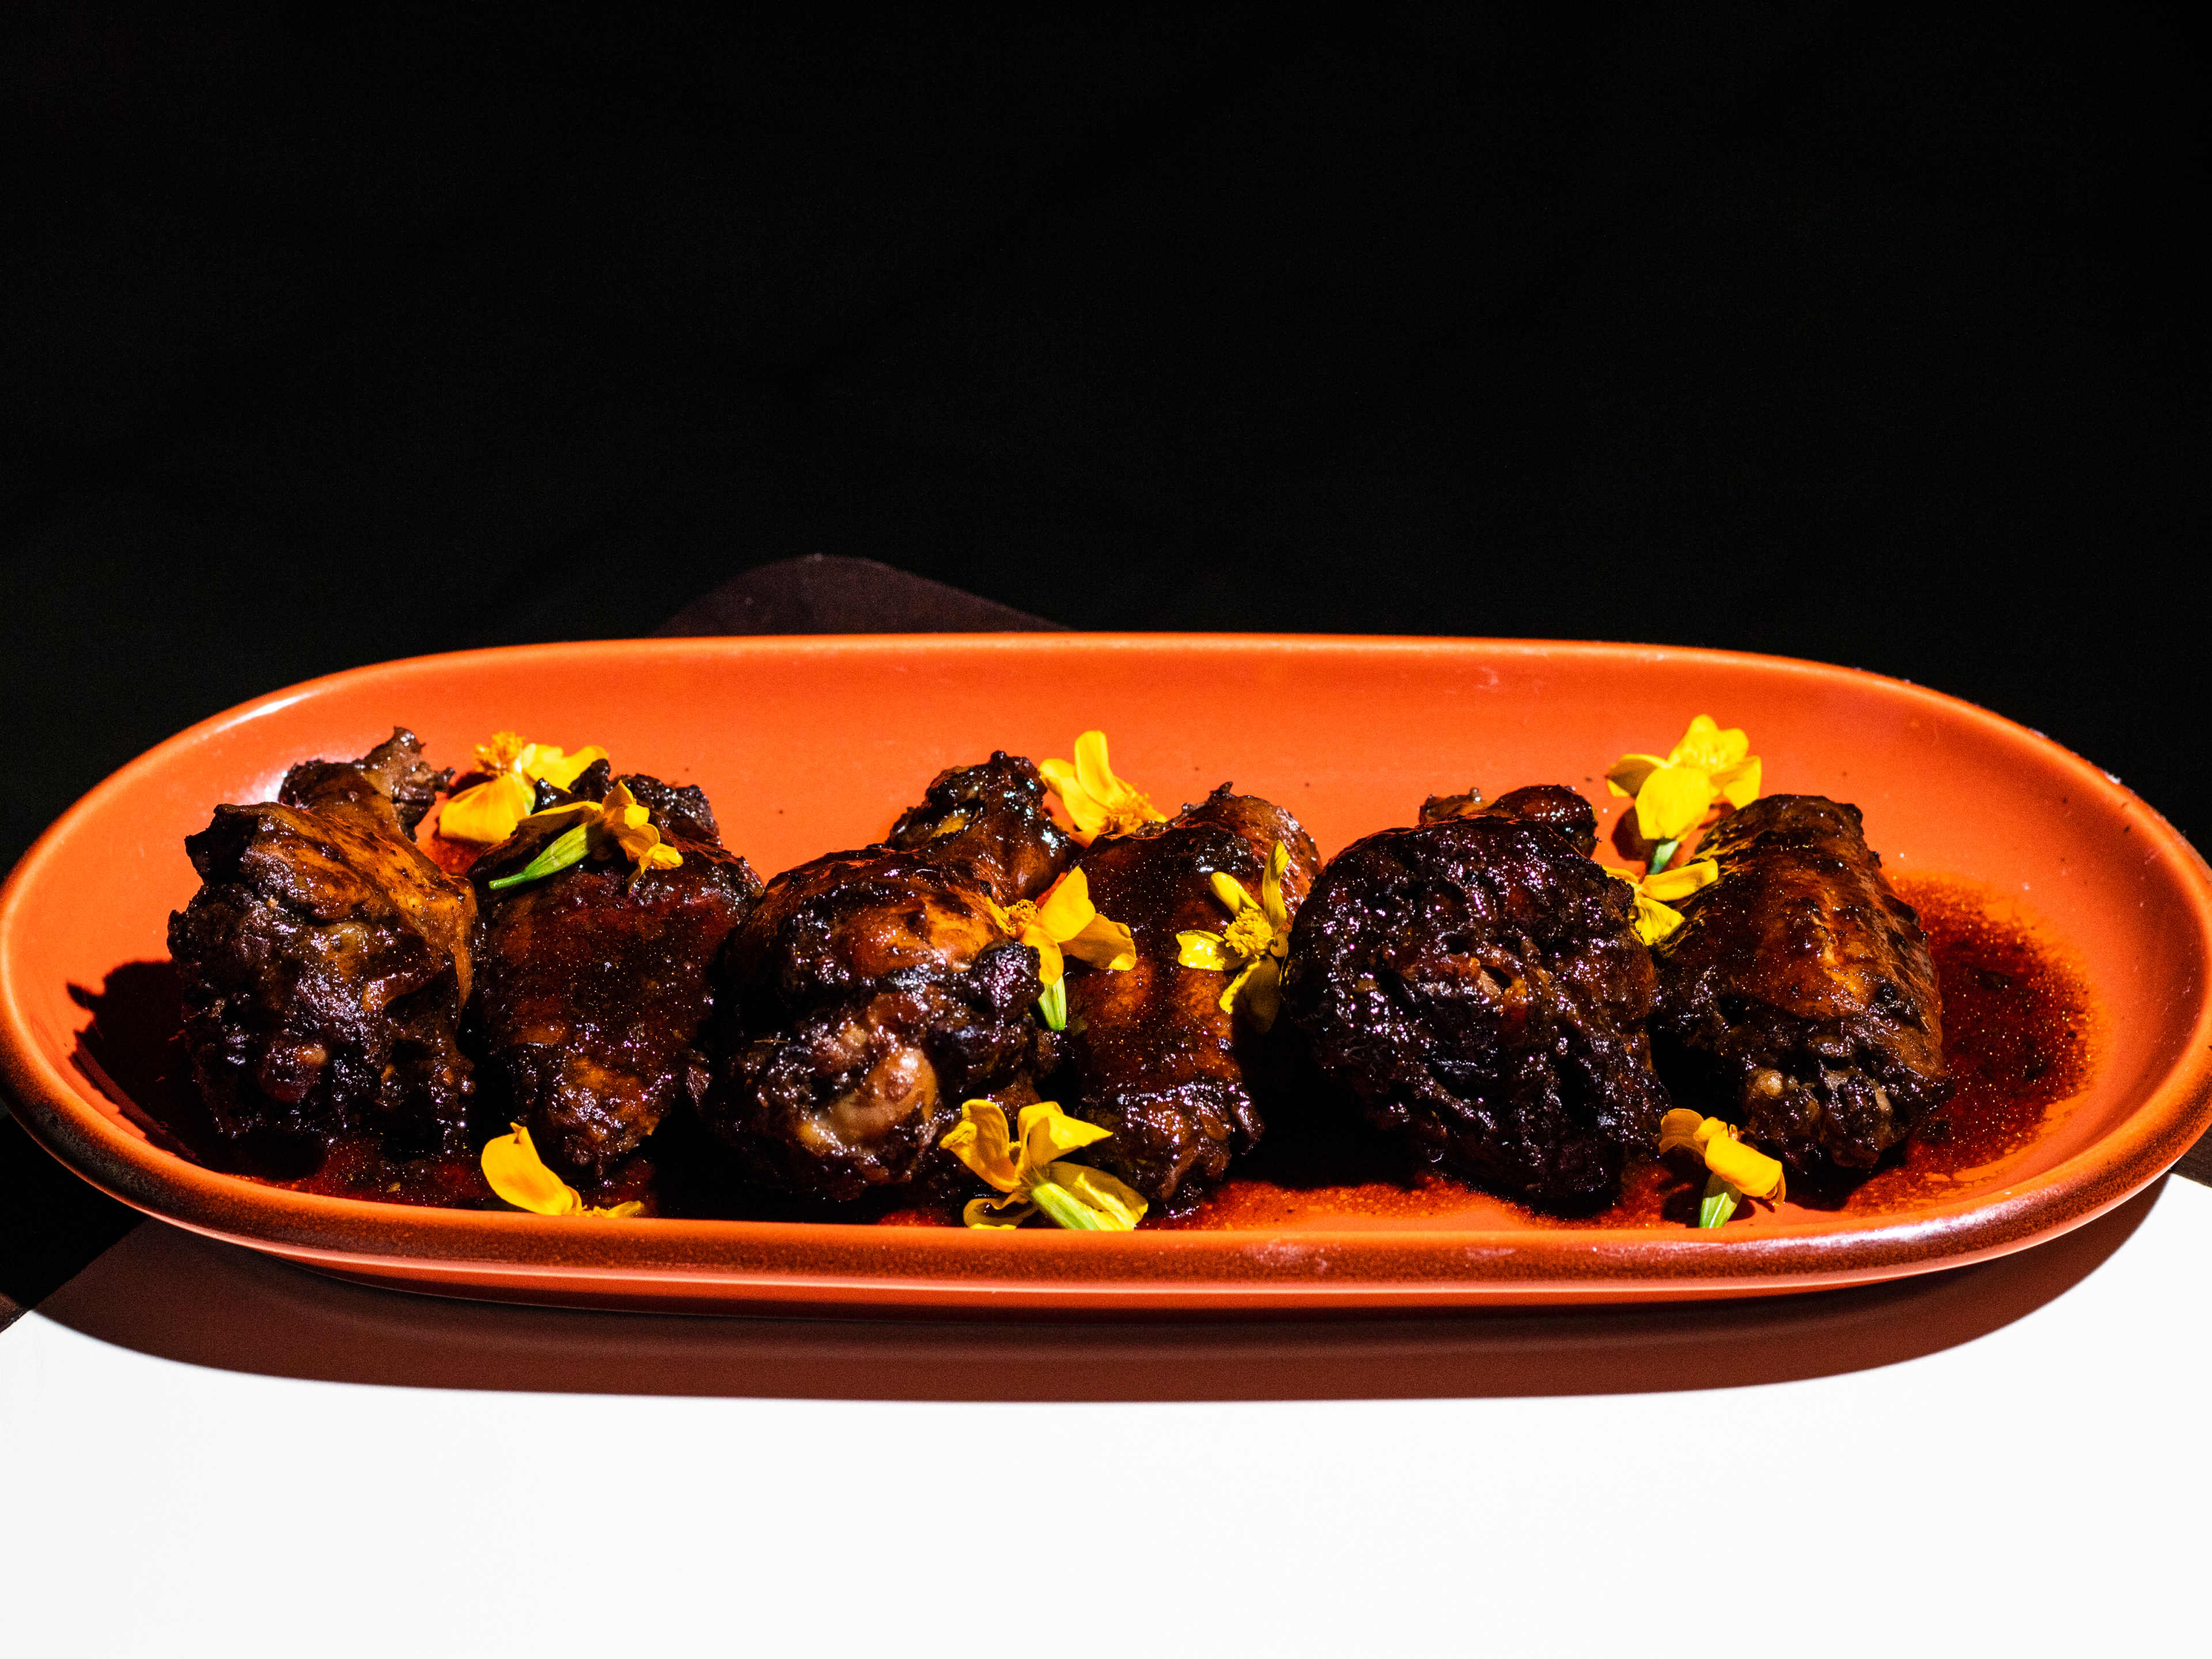 Wet jerk wings garnished with yellow flowers.